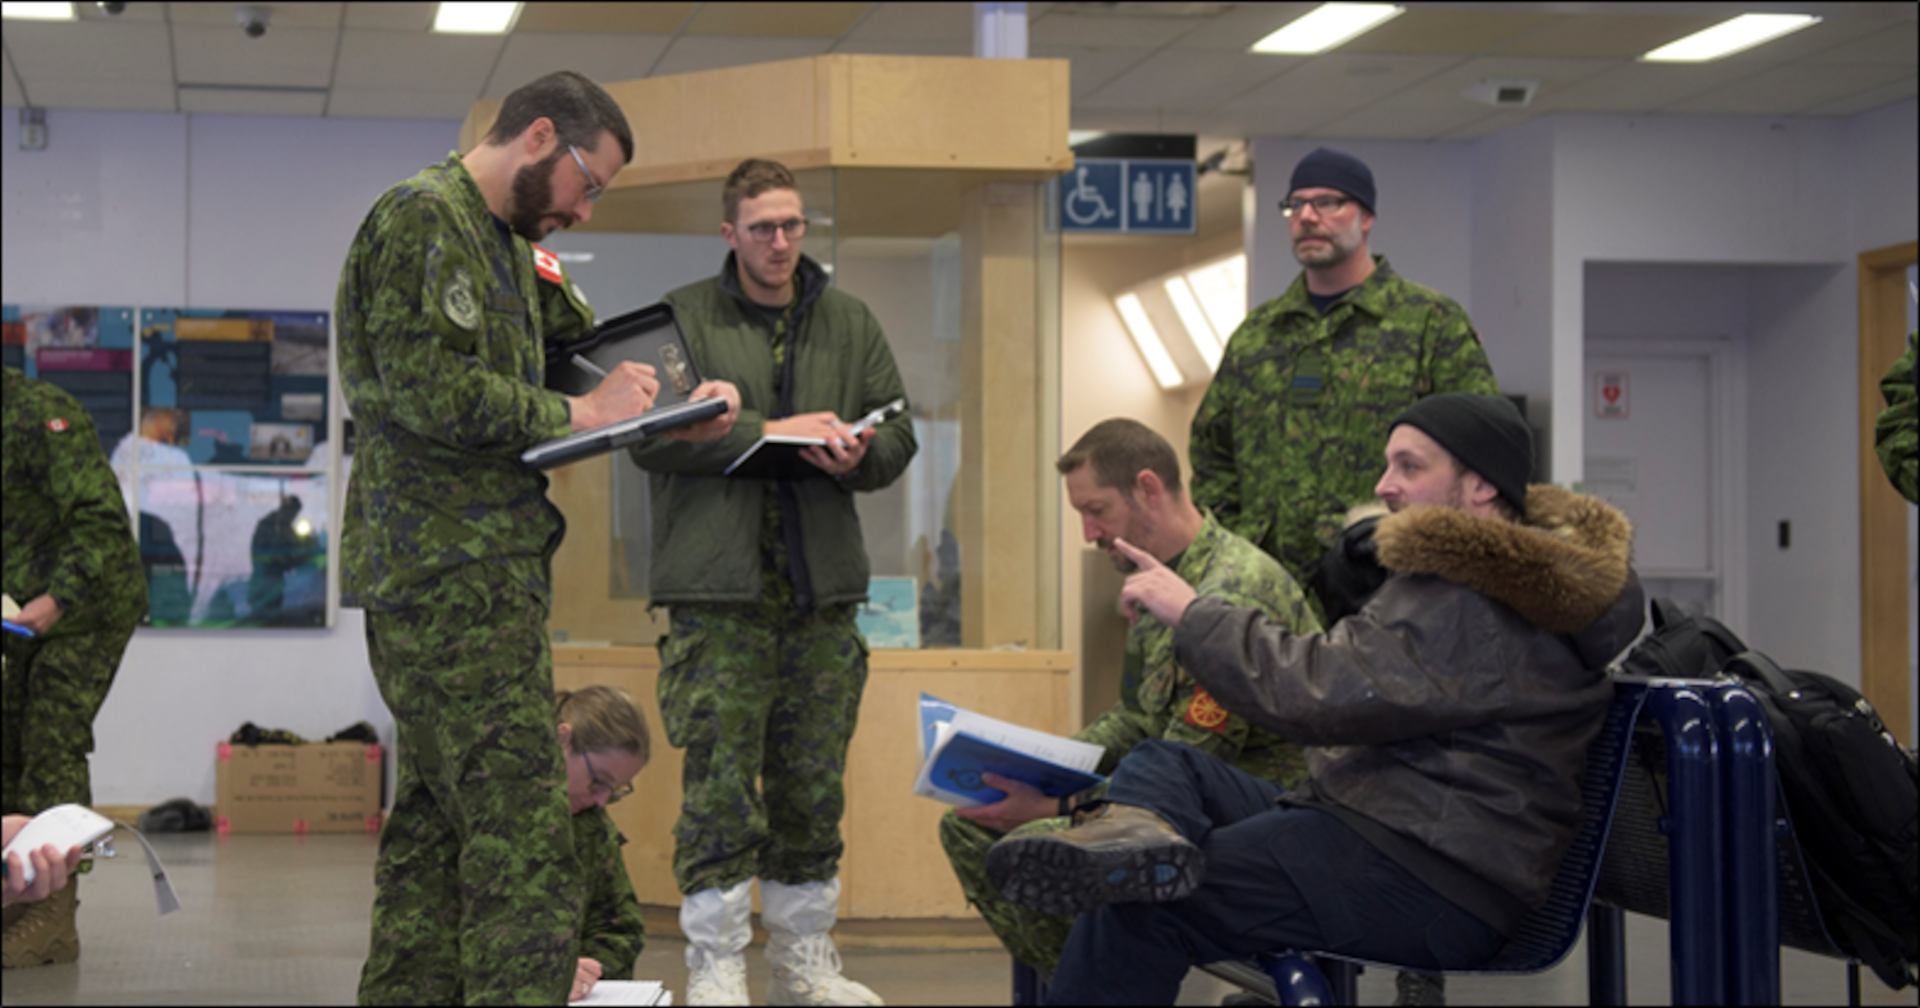 Reconnaissance team members from 2 Air Expeditionary Wing interview the Rankin Inlet Airport manager during their survey visit to Rankin Inlet, Nunavut, Jan. 28, 2020.